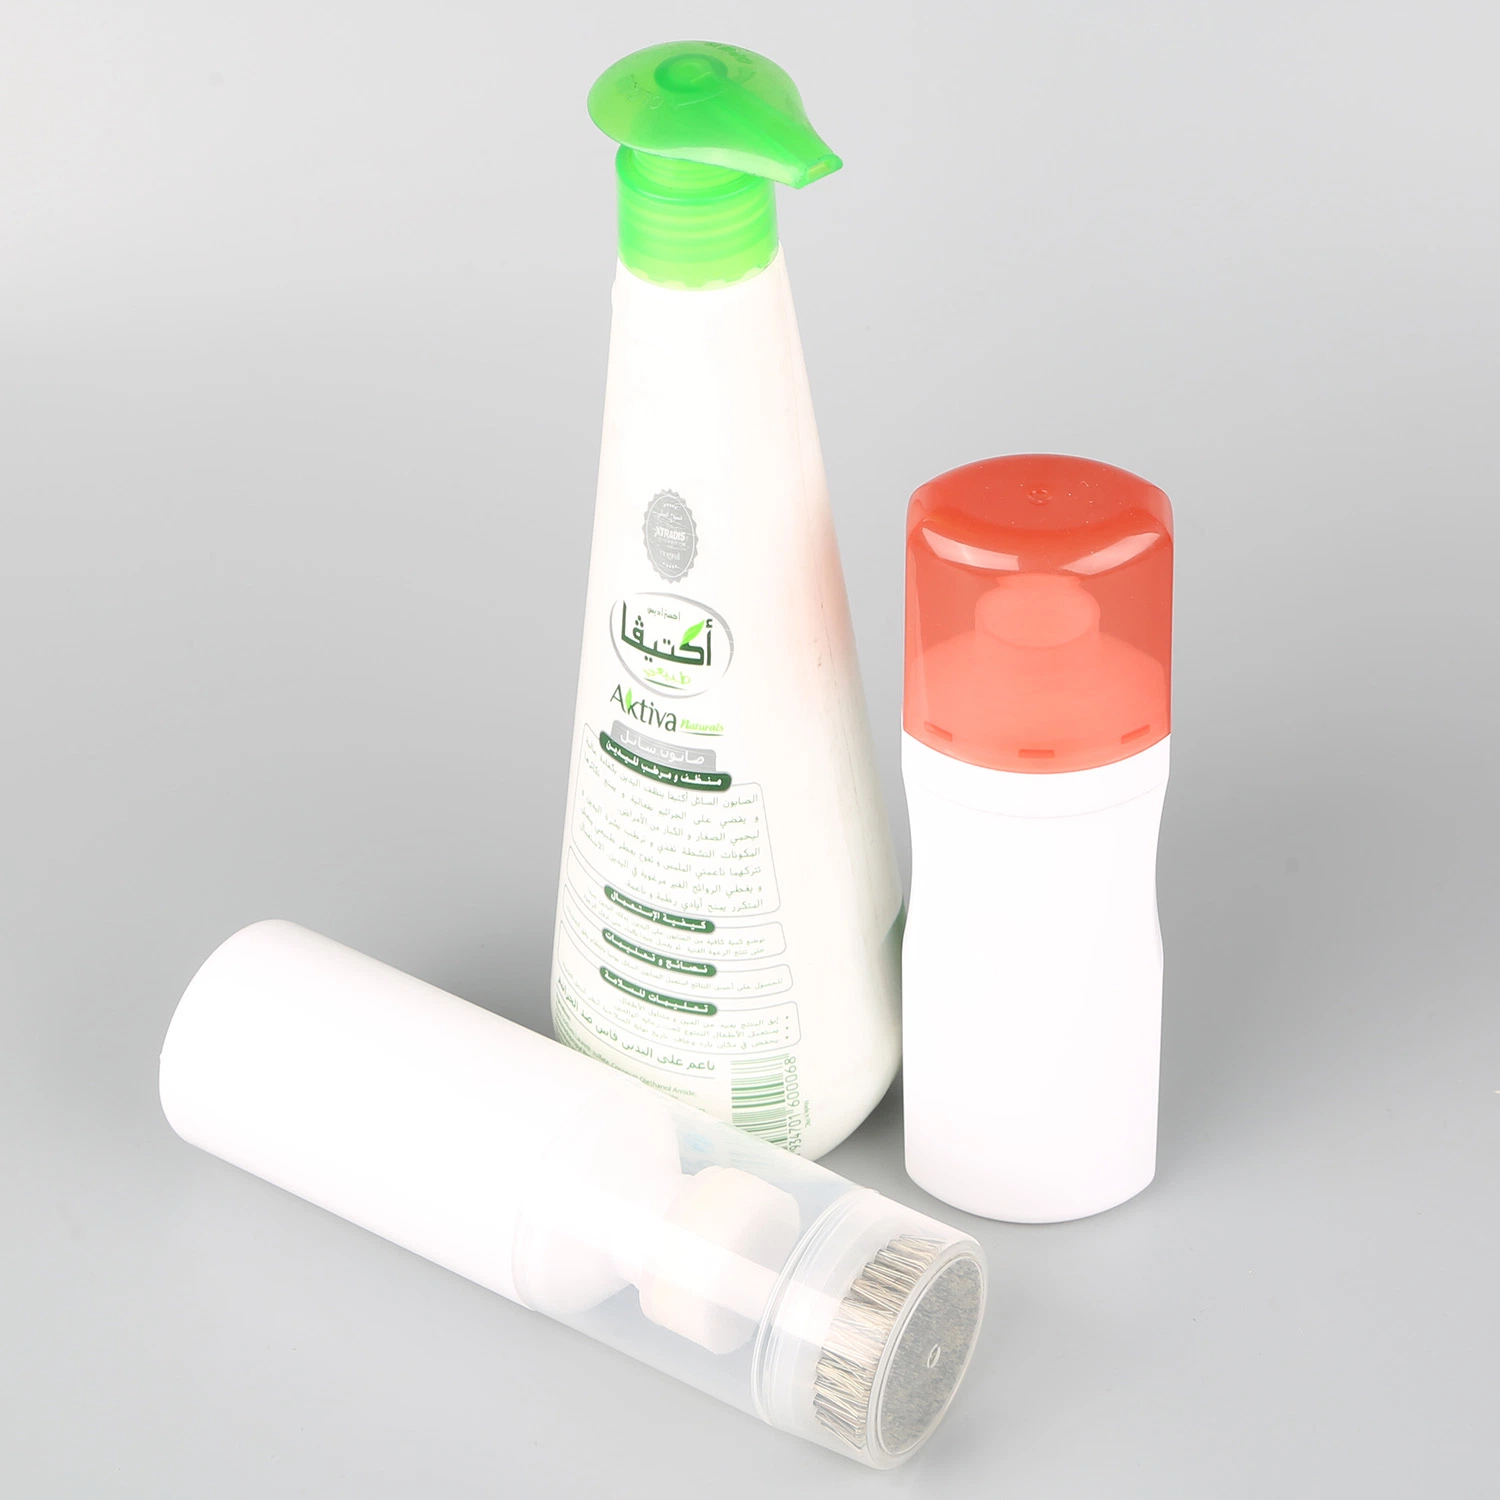 Customized White Pet Bottles for Cosmetics/Skin Care Products